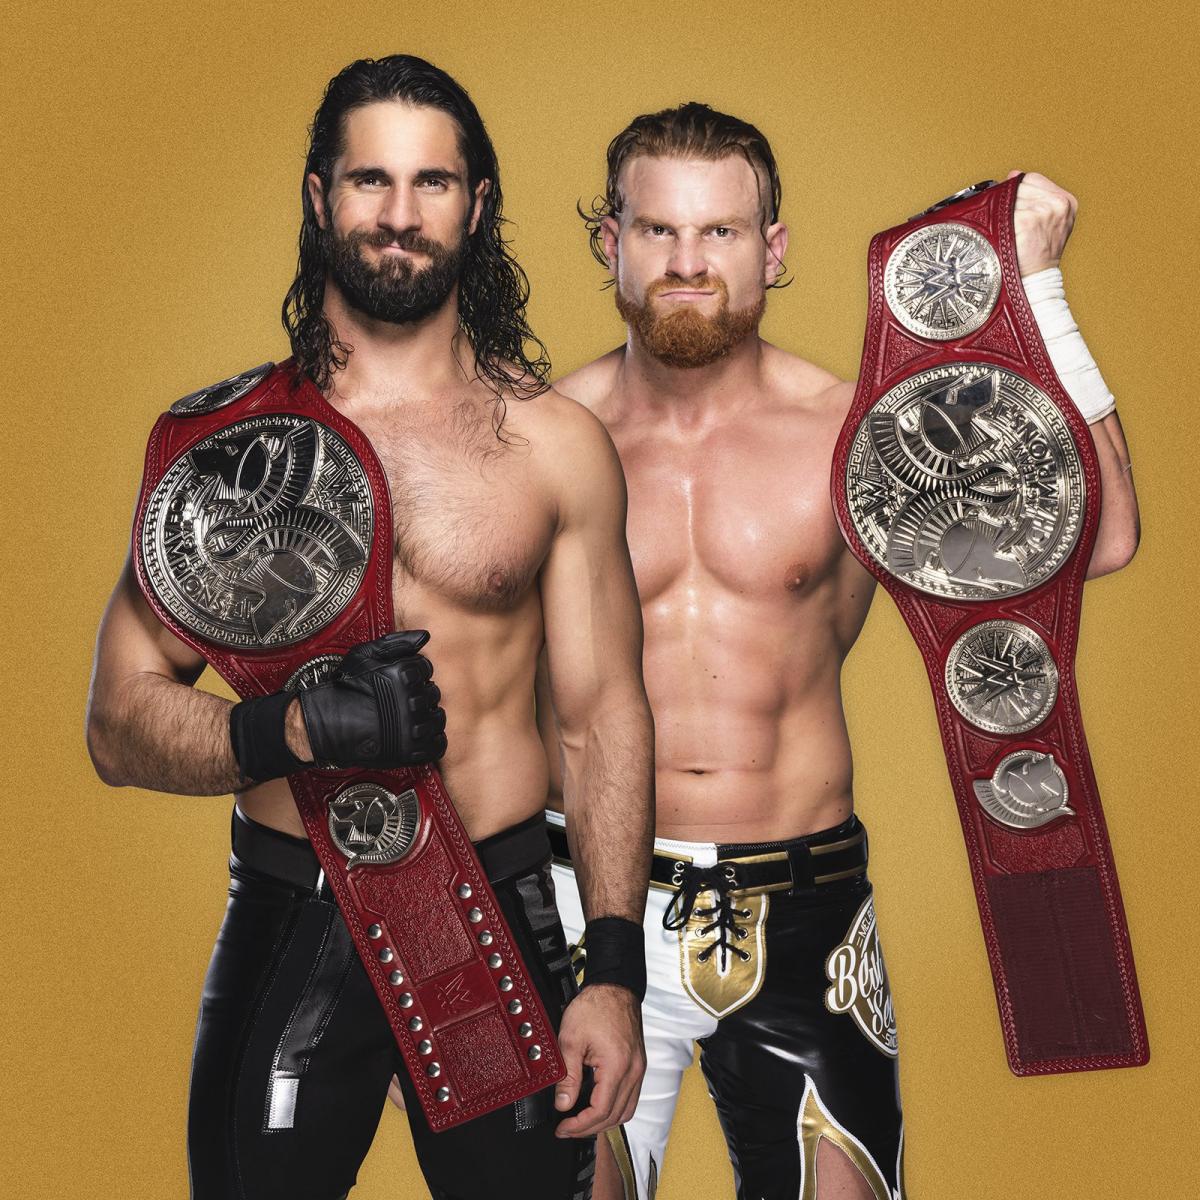 wwe-raw-tag-team-championship-wallpapers-wallpaper-cave